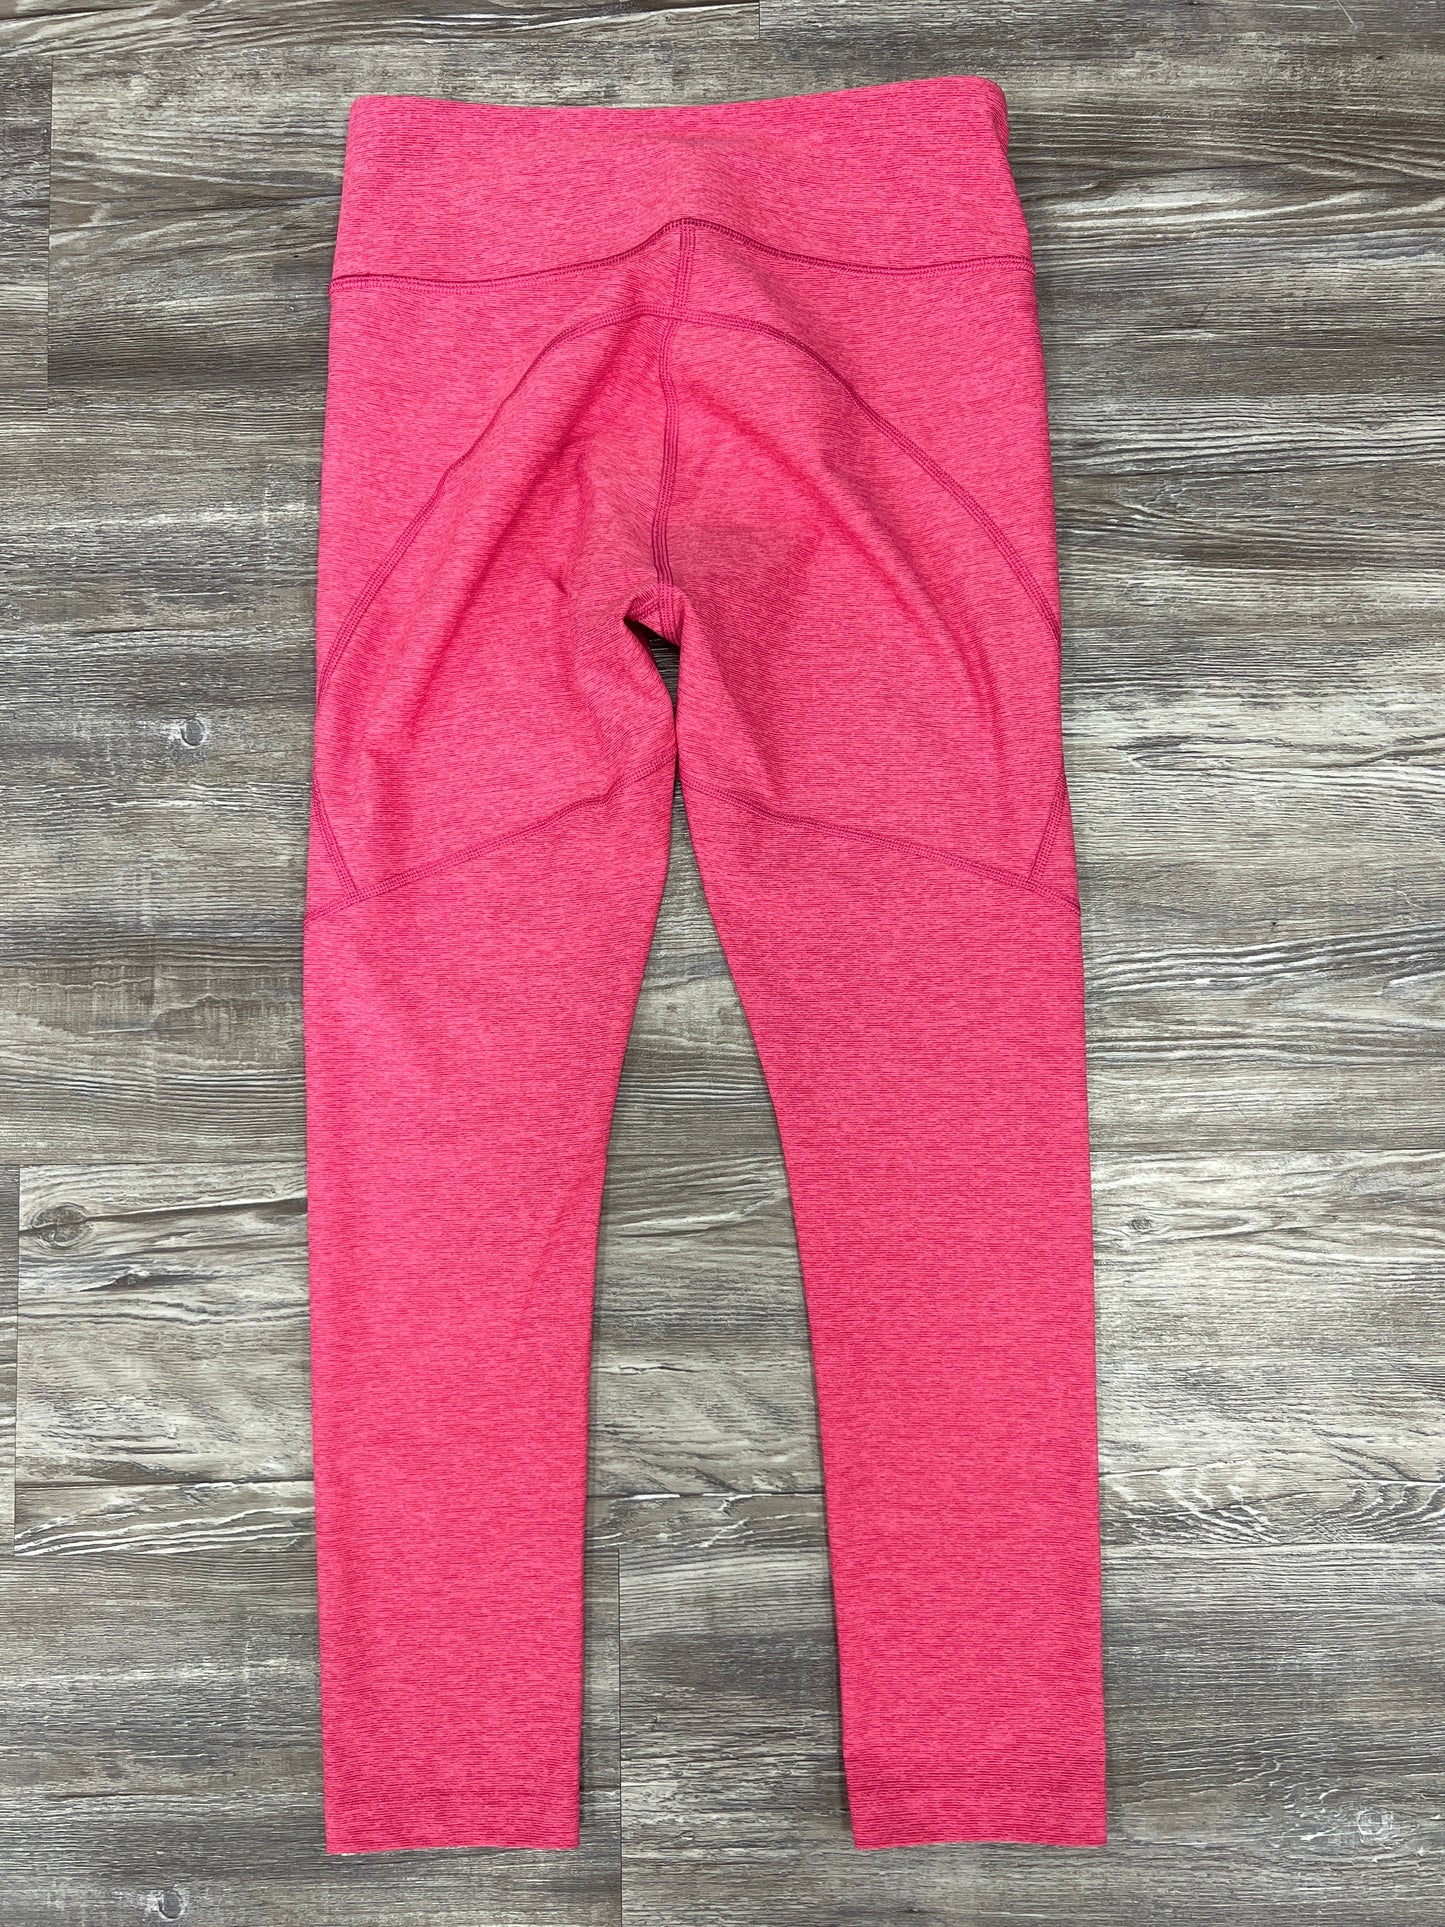 Athletic Leggings By Outdoor Voices for Size: S